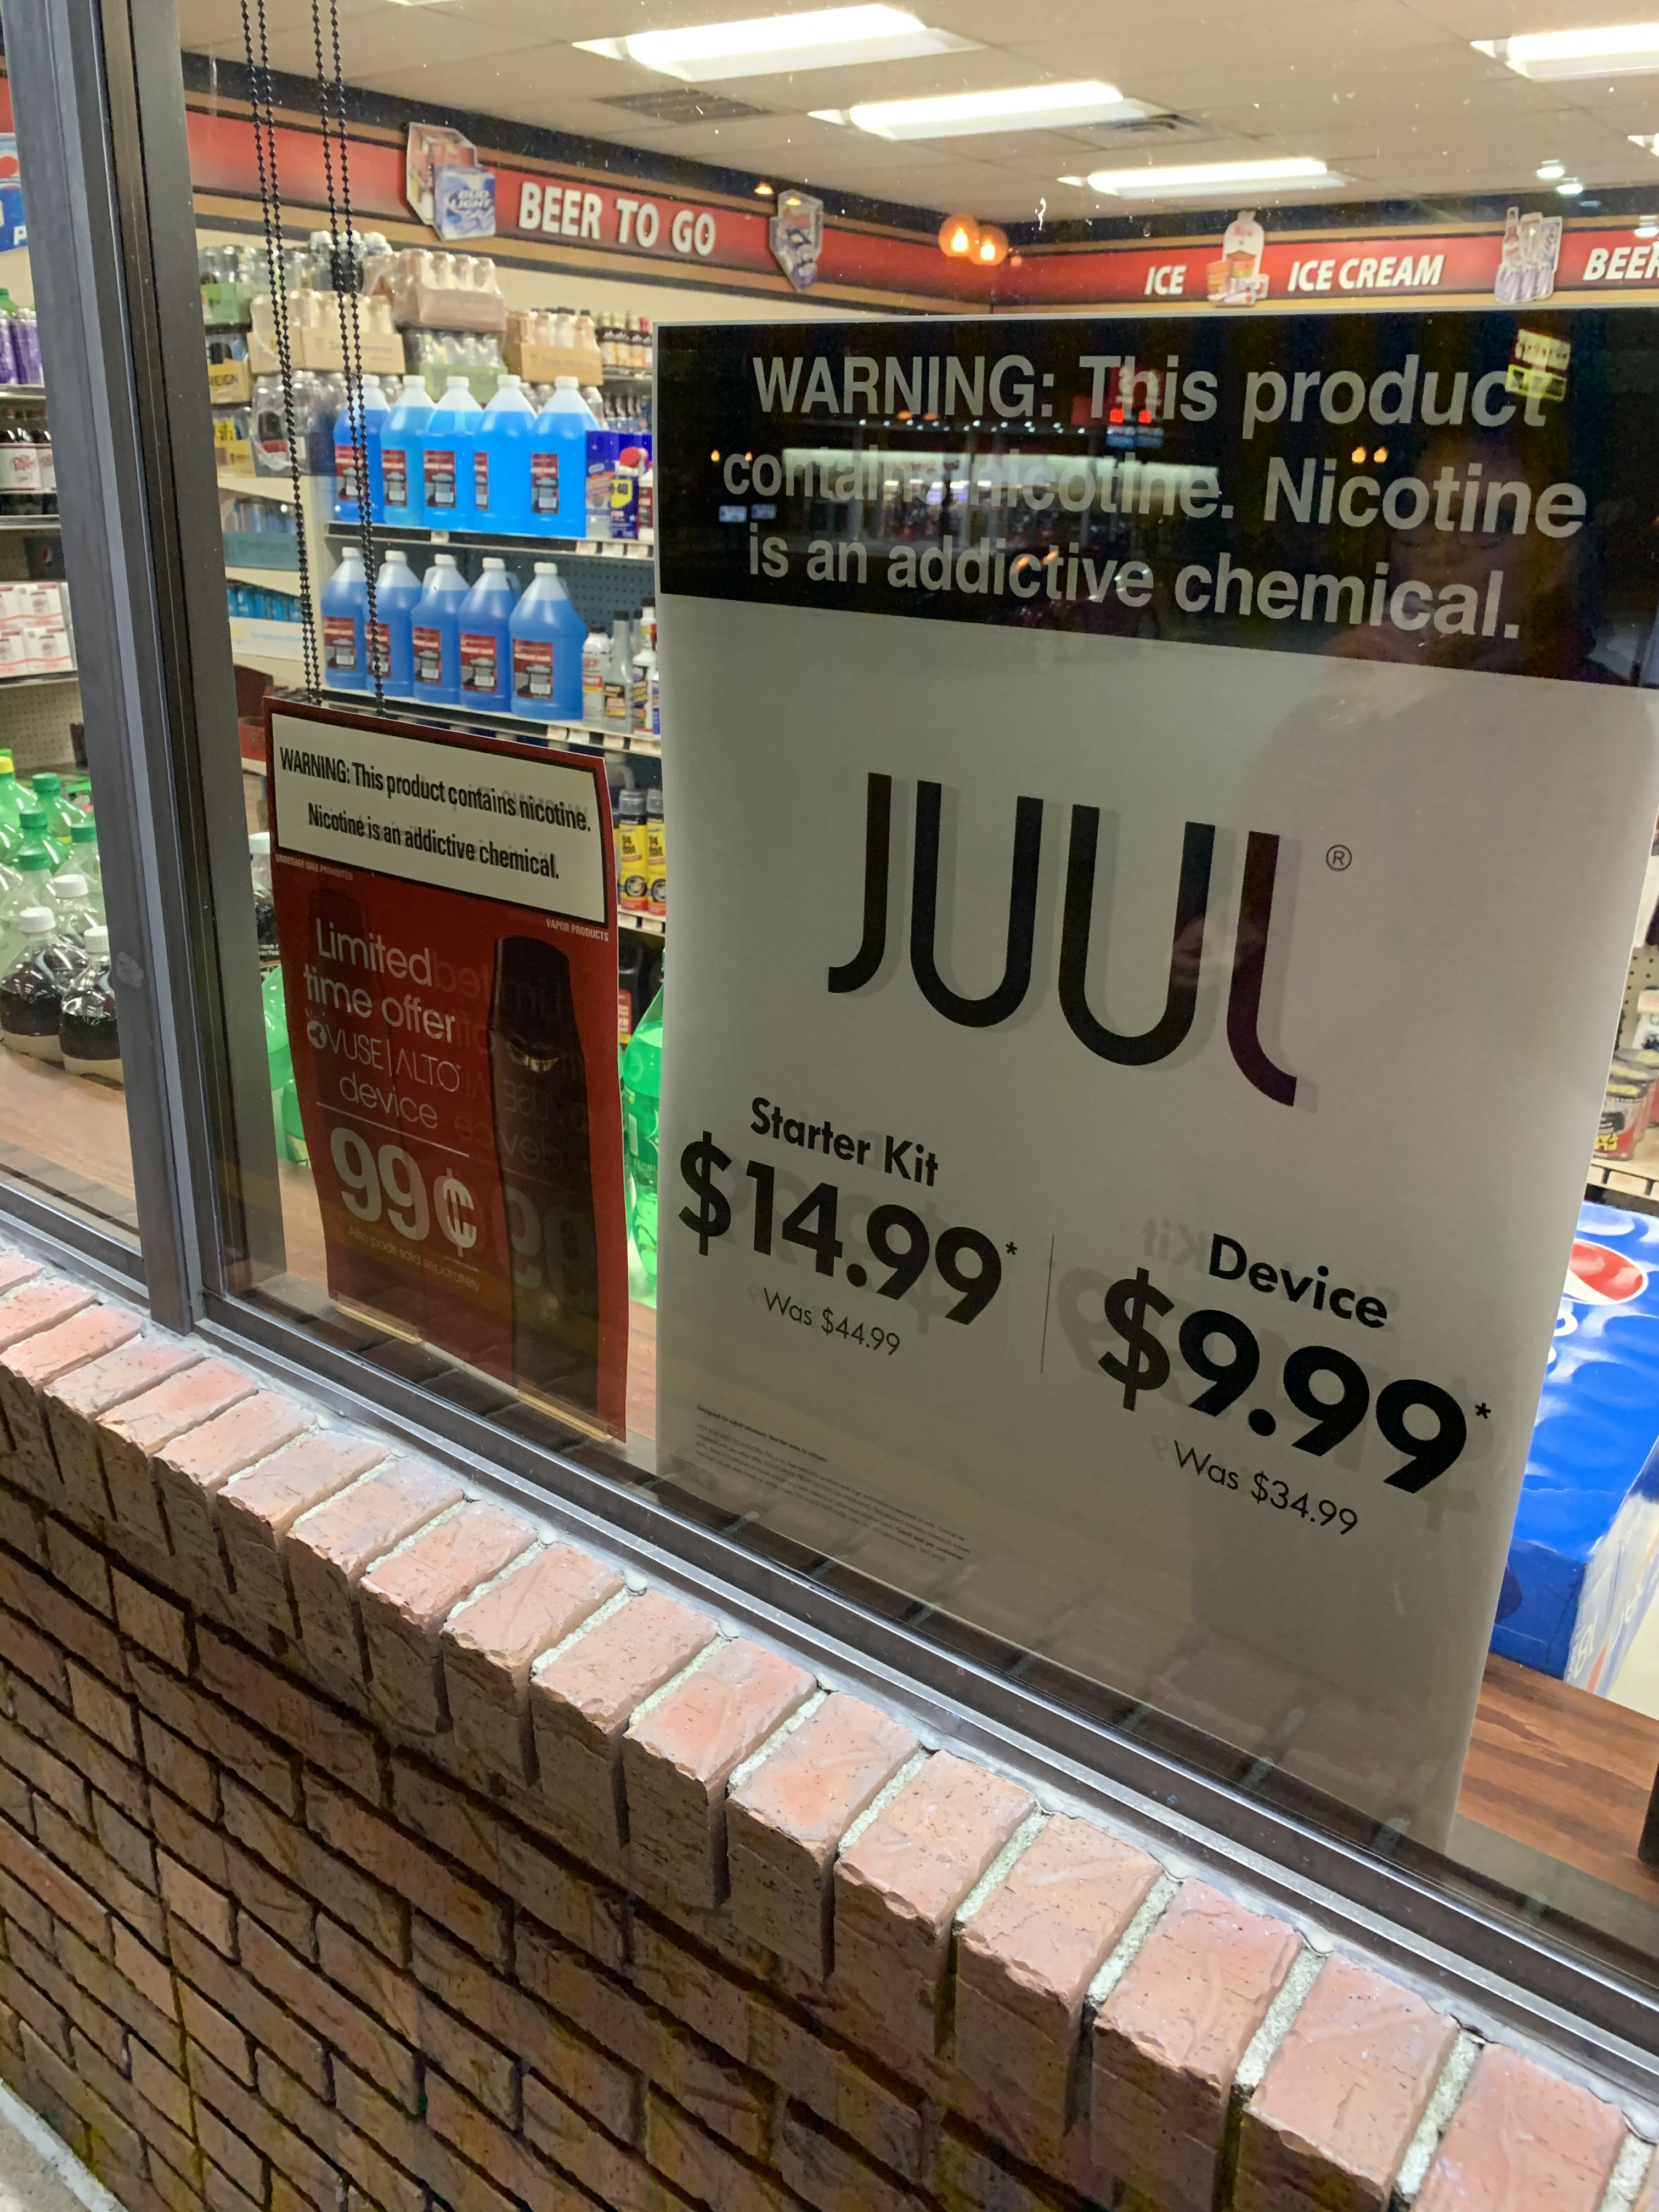 ads for Juul and Vuse in a retailer window